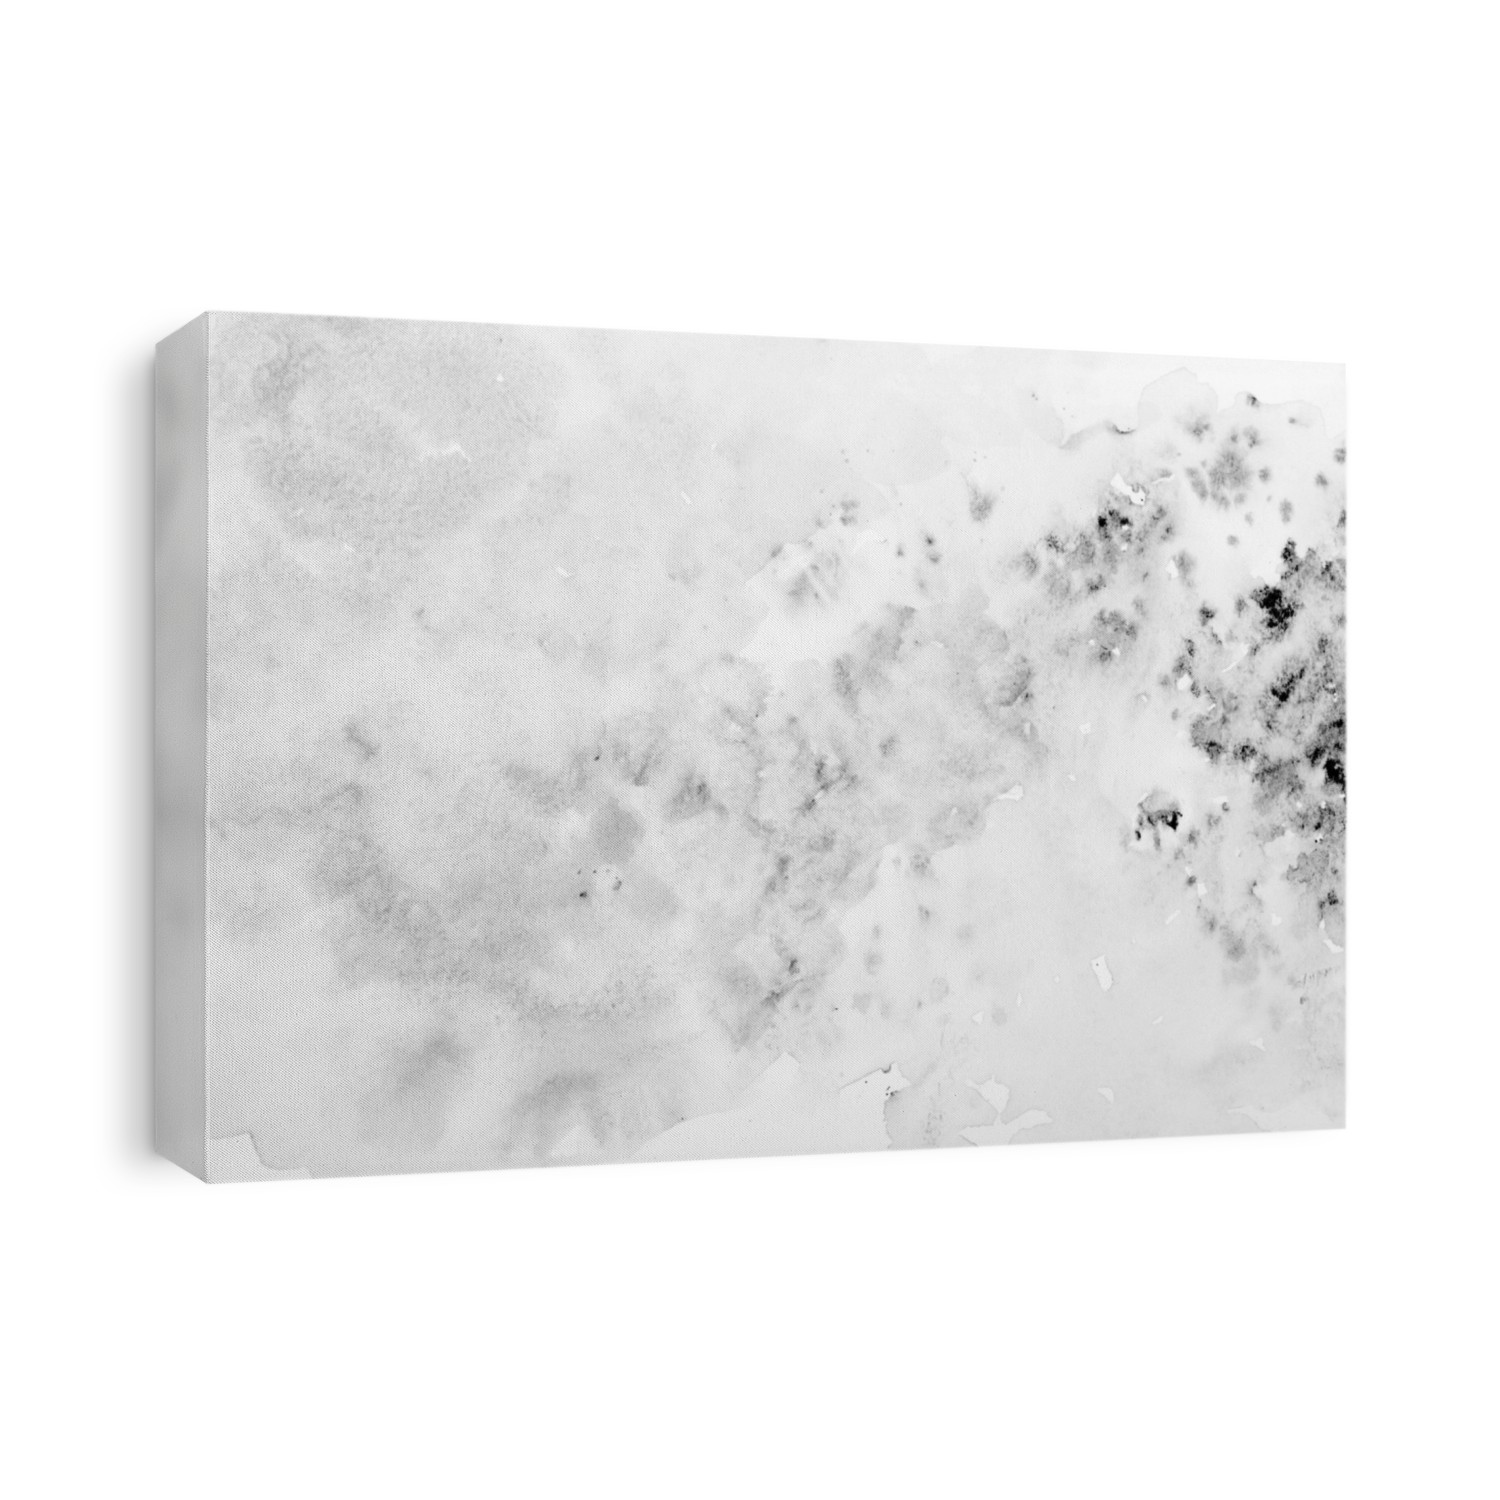 abstract gray watercolor splash background